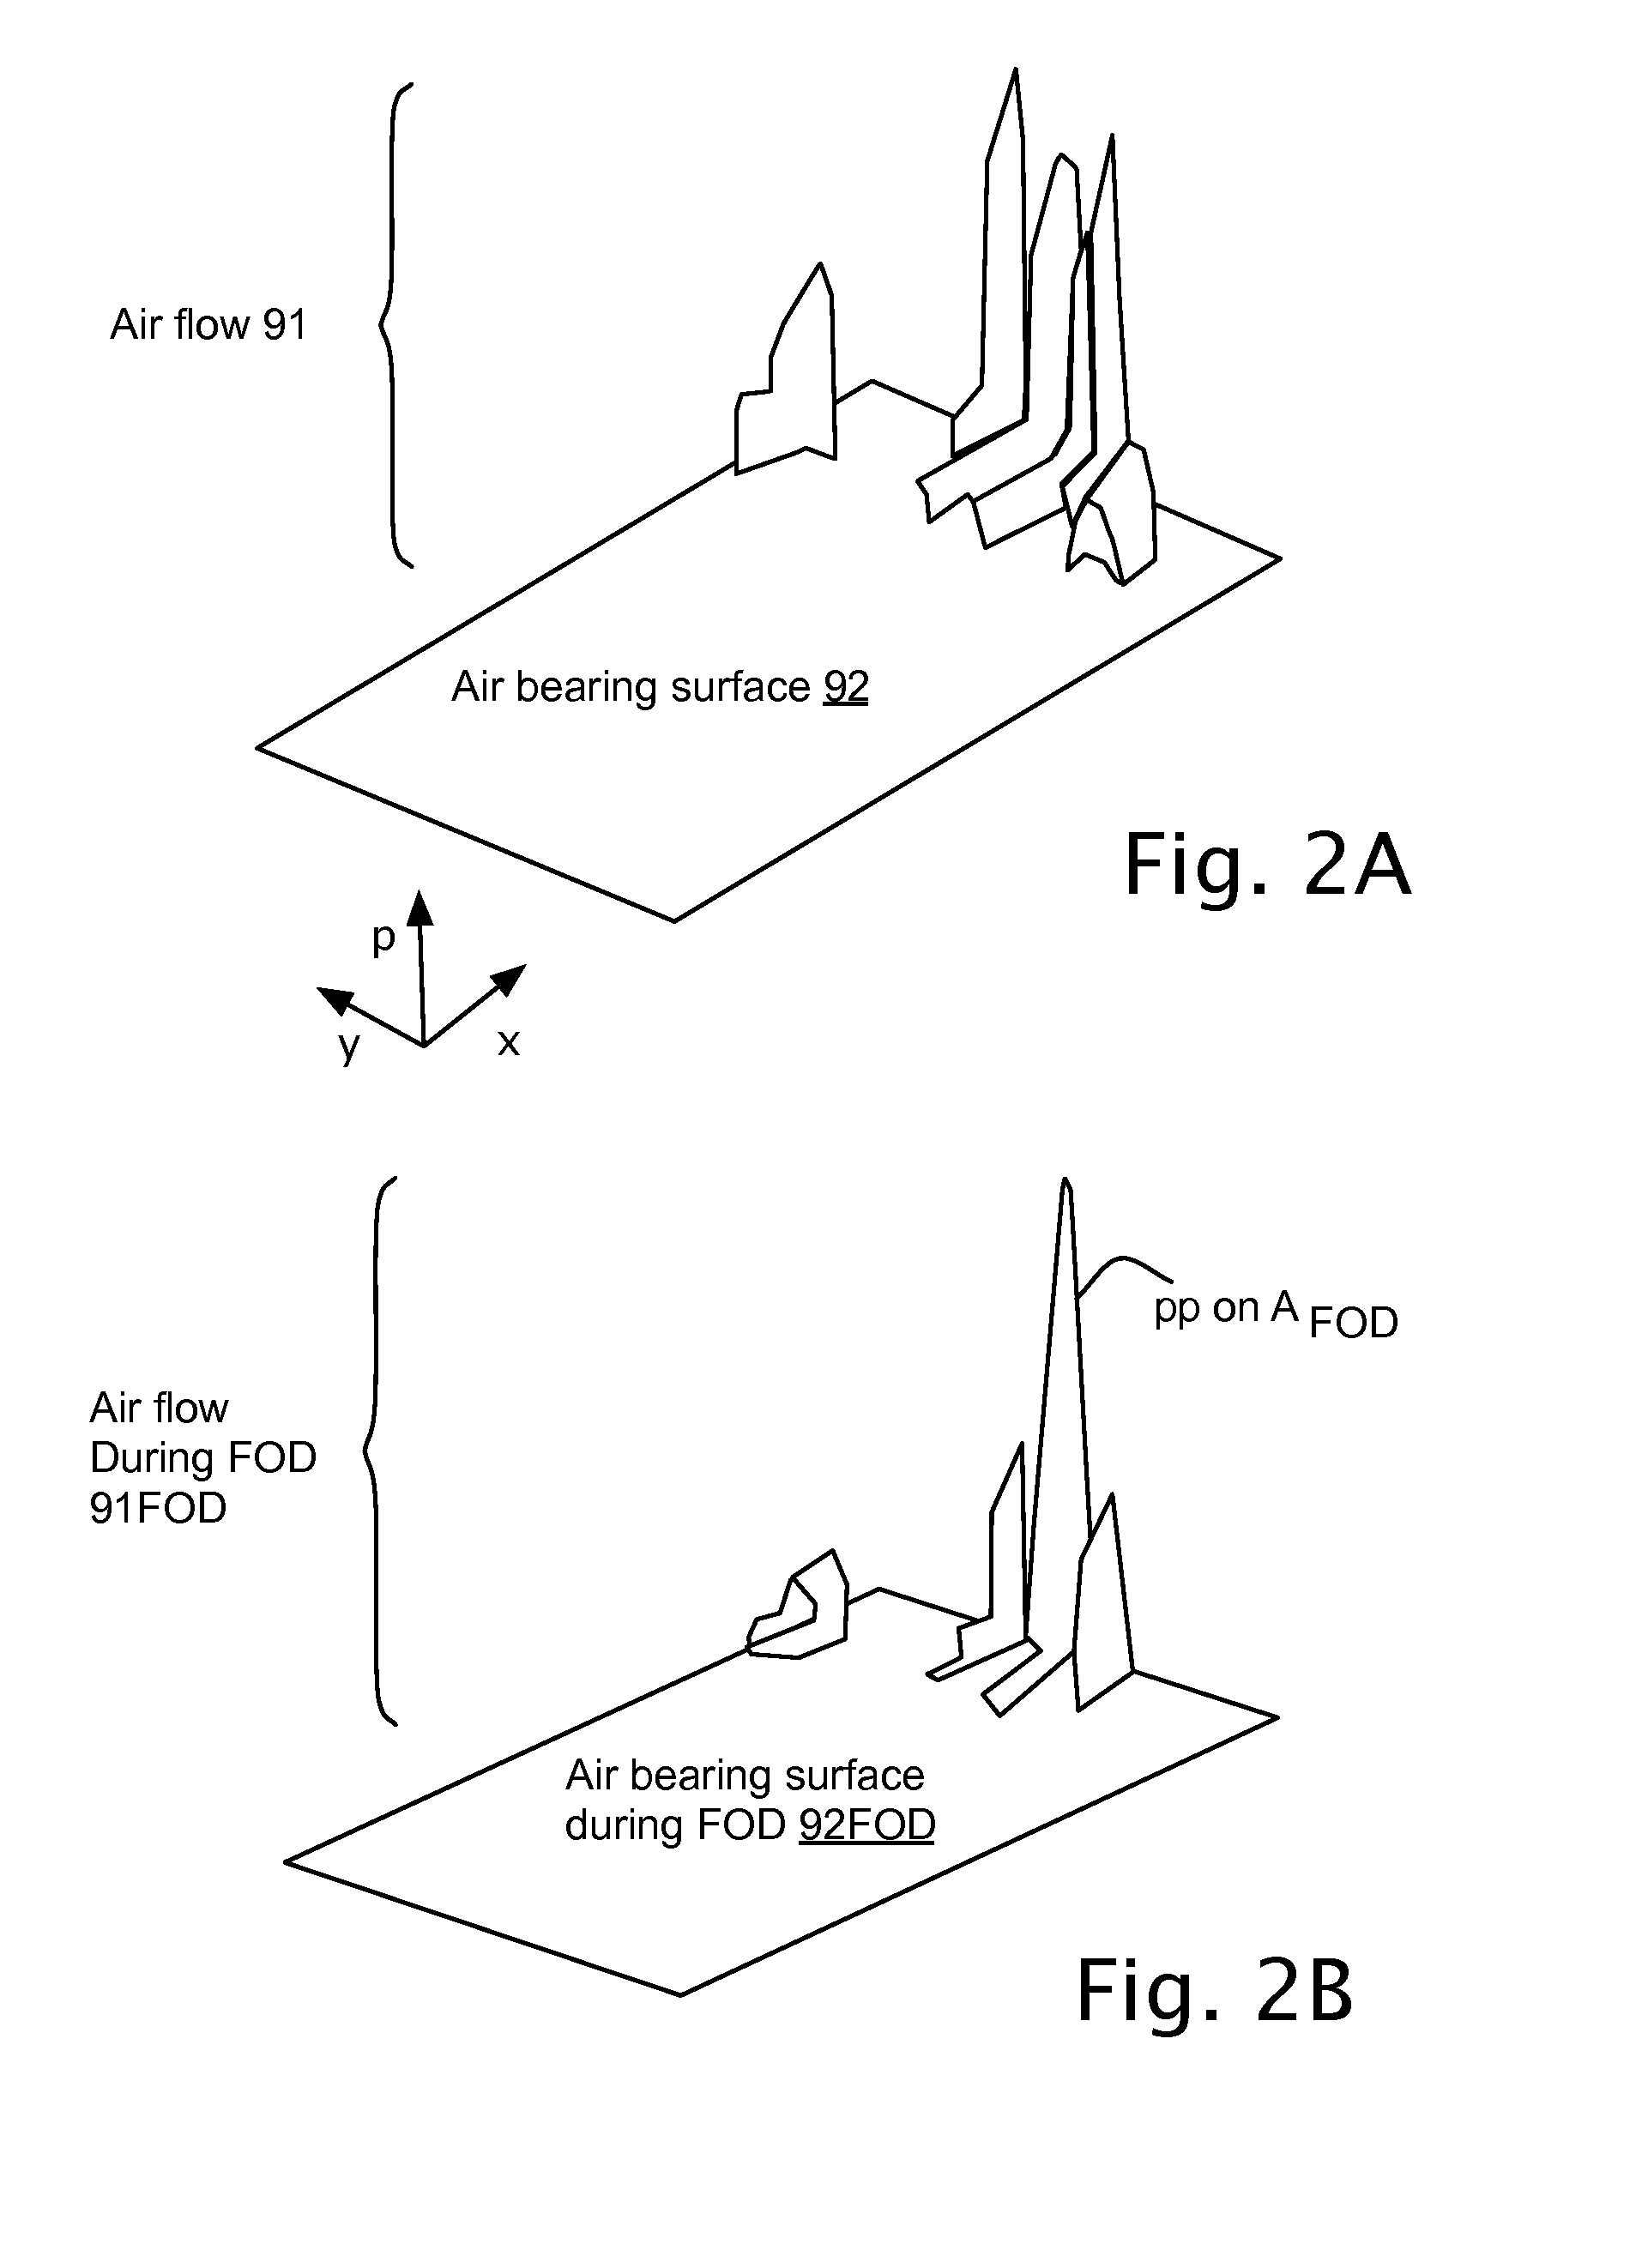 Air Bearing Surface Method and Apparatus Optimizing Flying Height On Demand Efficiency During Flying Height on Demand Activity of Slider in a Hard Disk Drive